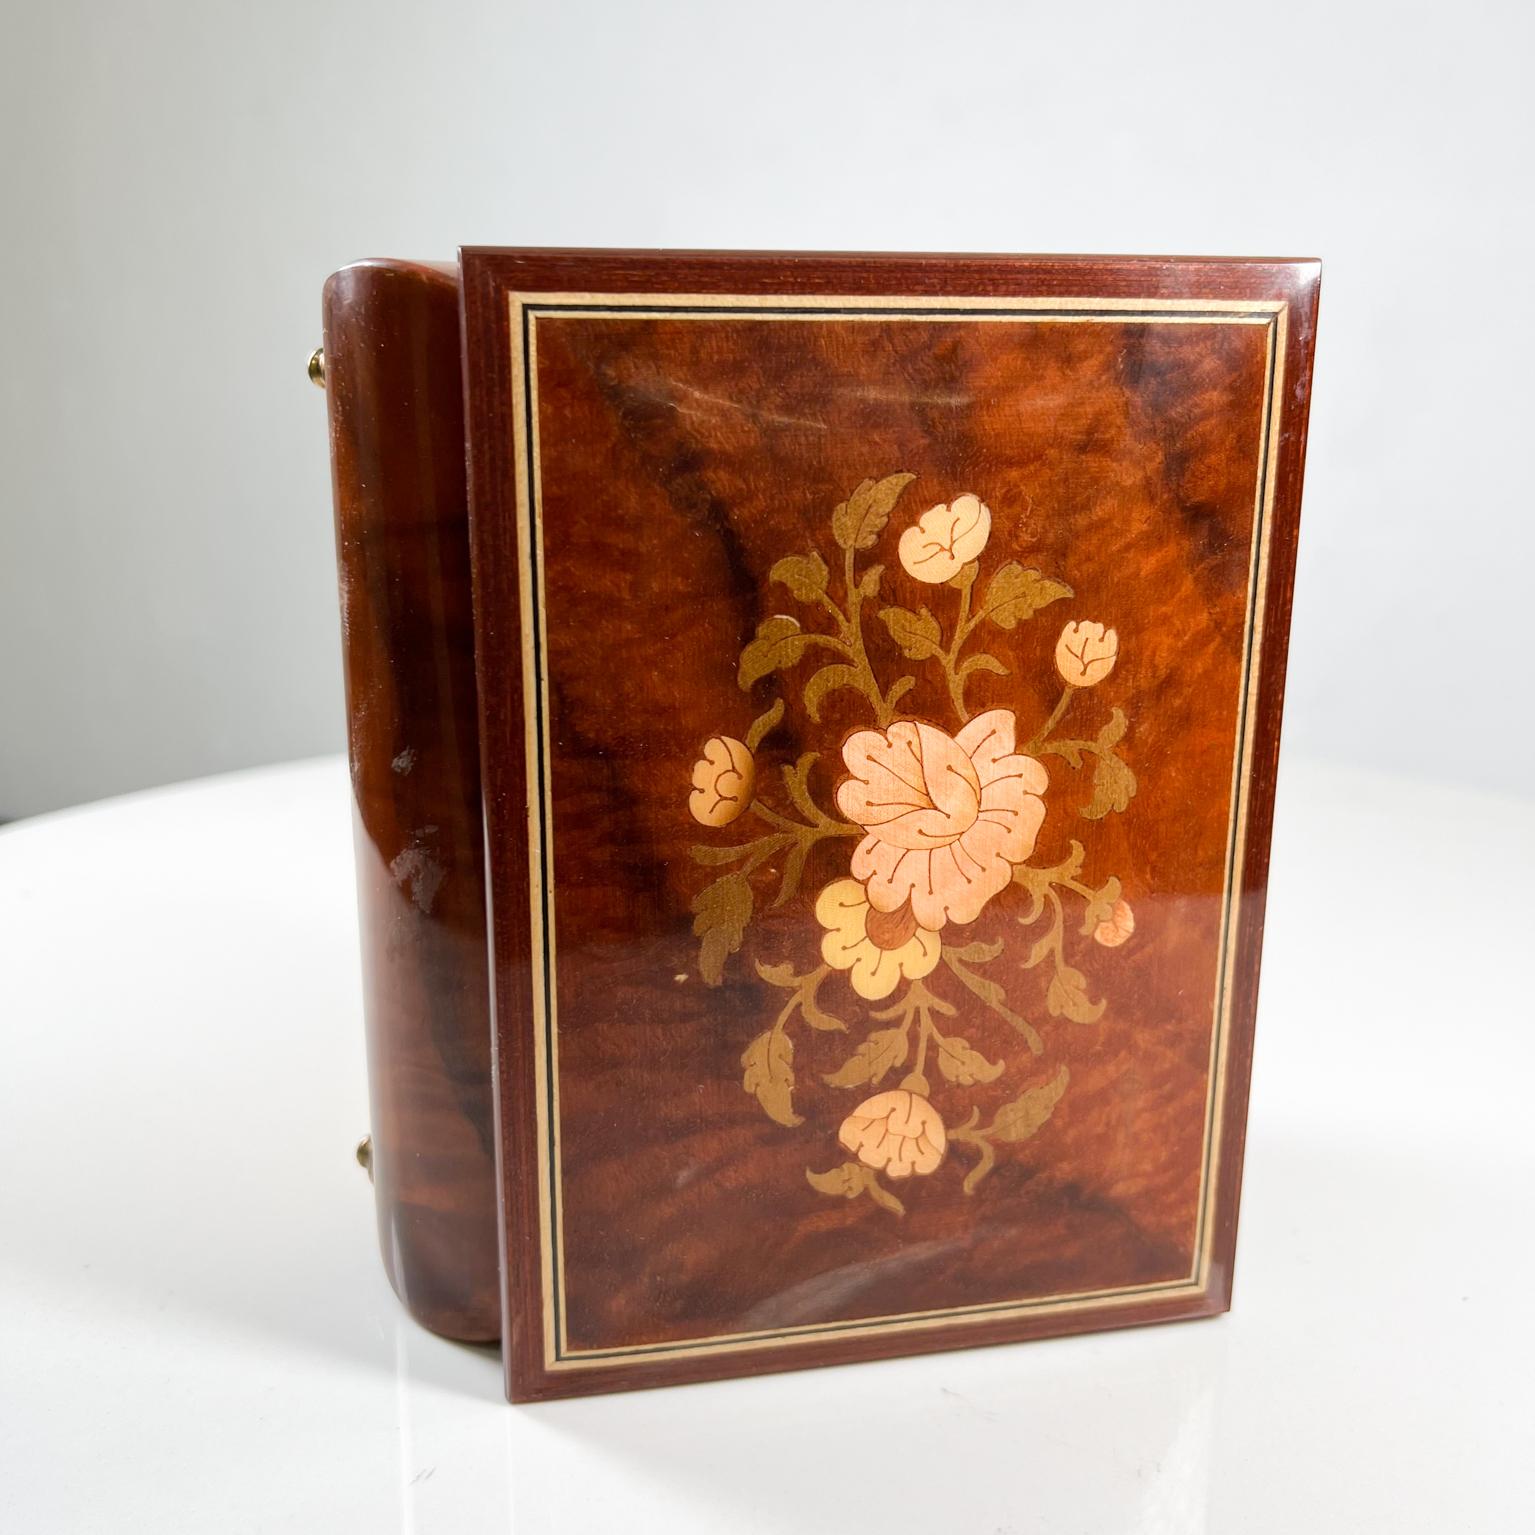 1970s Reuge Ste Croix Inlaid Wood Jewelry Box Music Love Story Italy 4